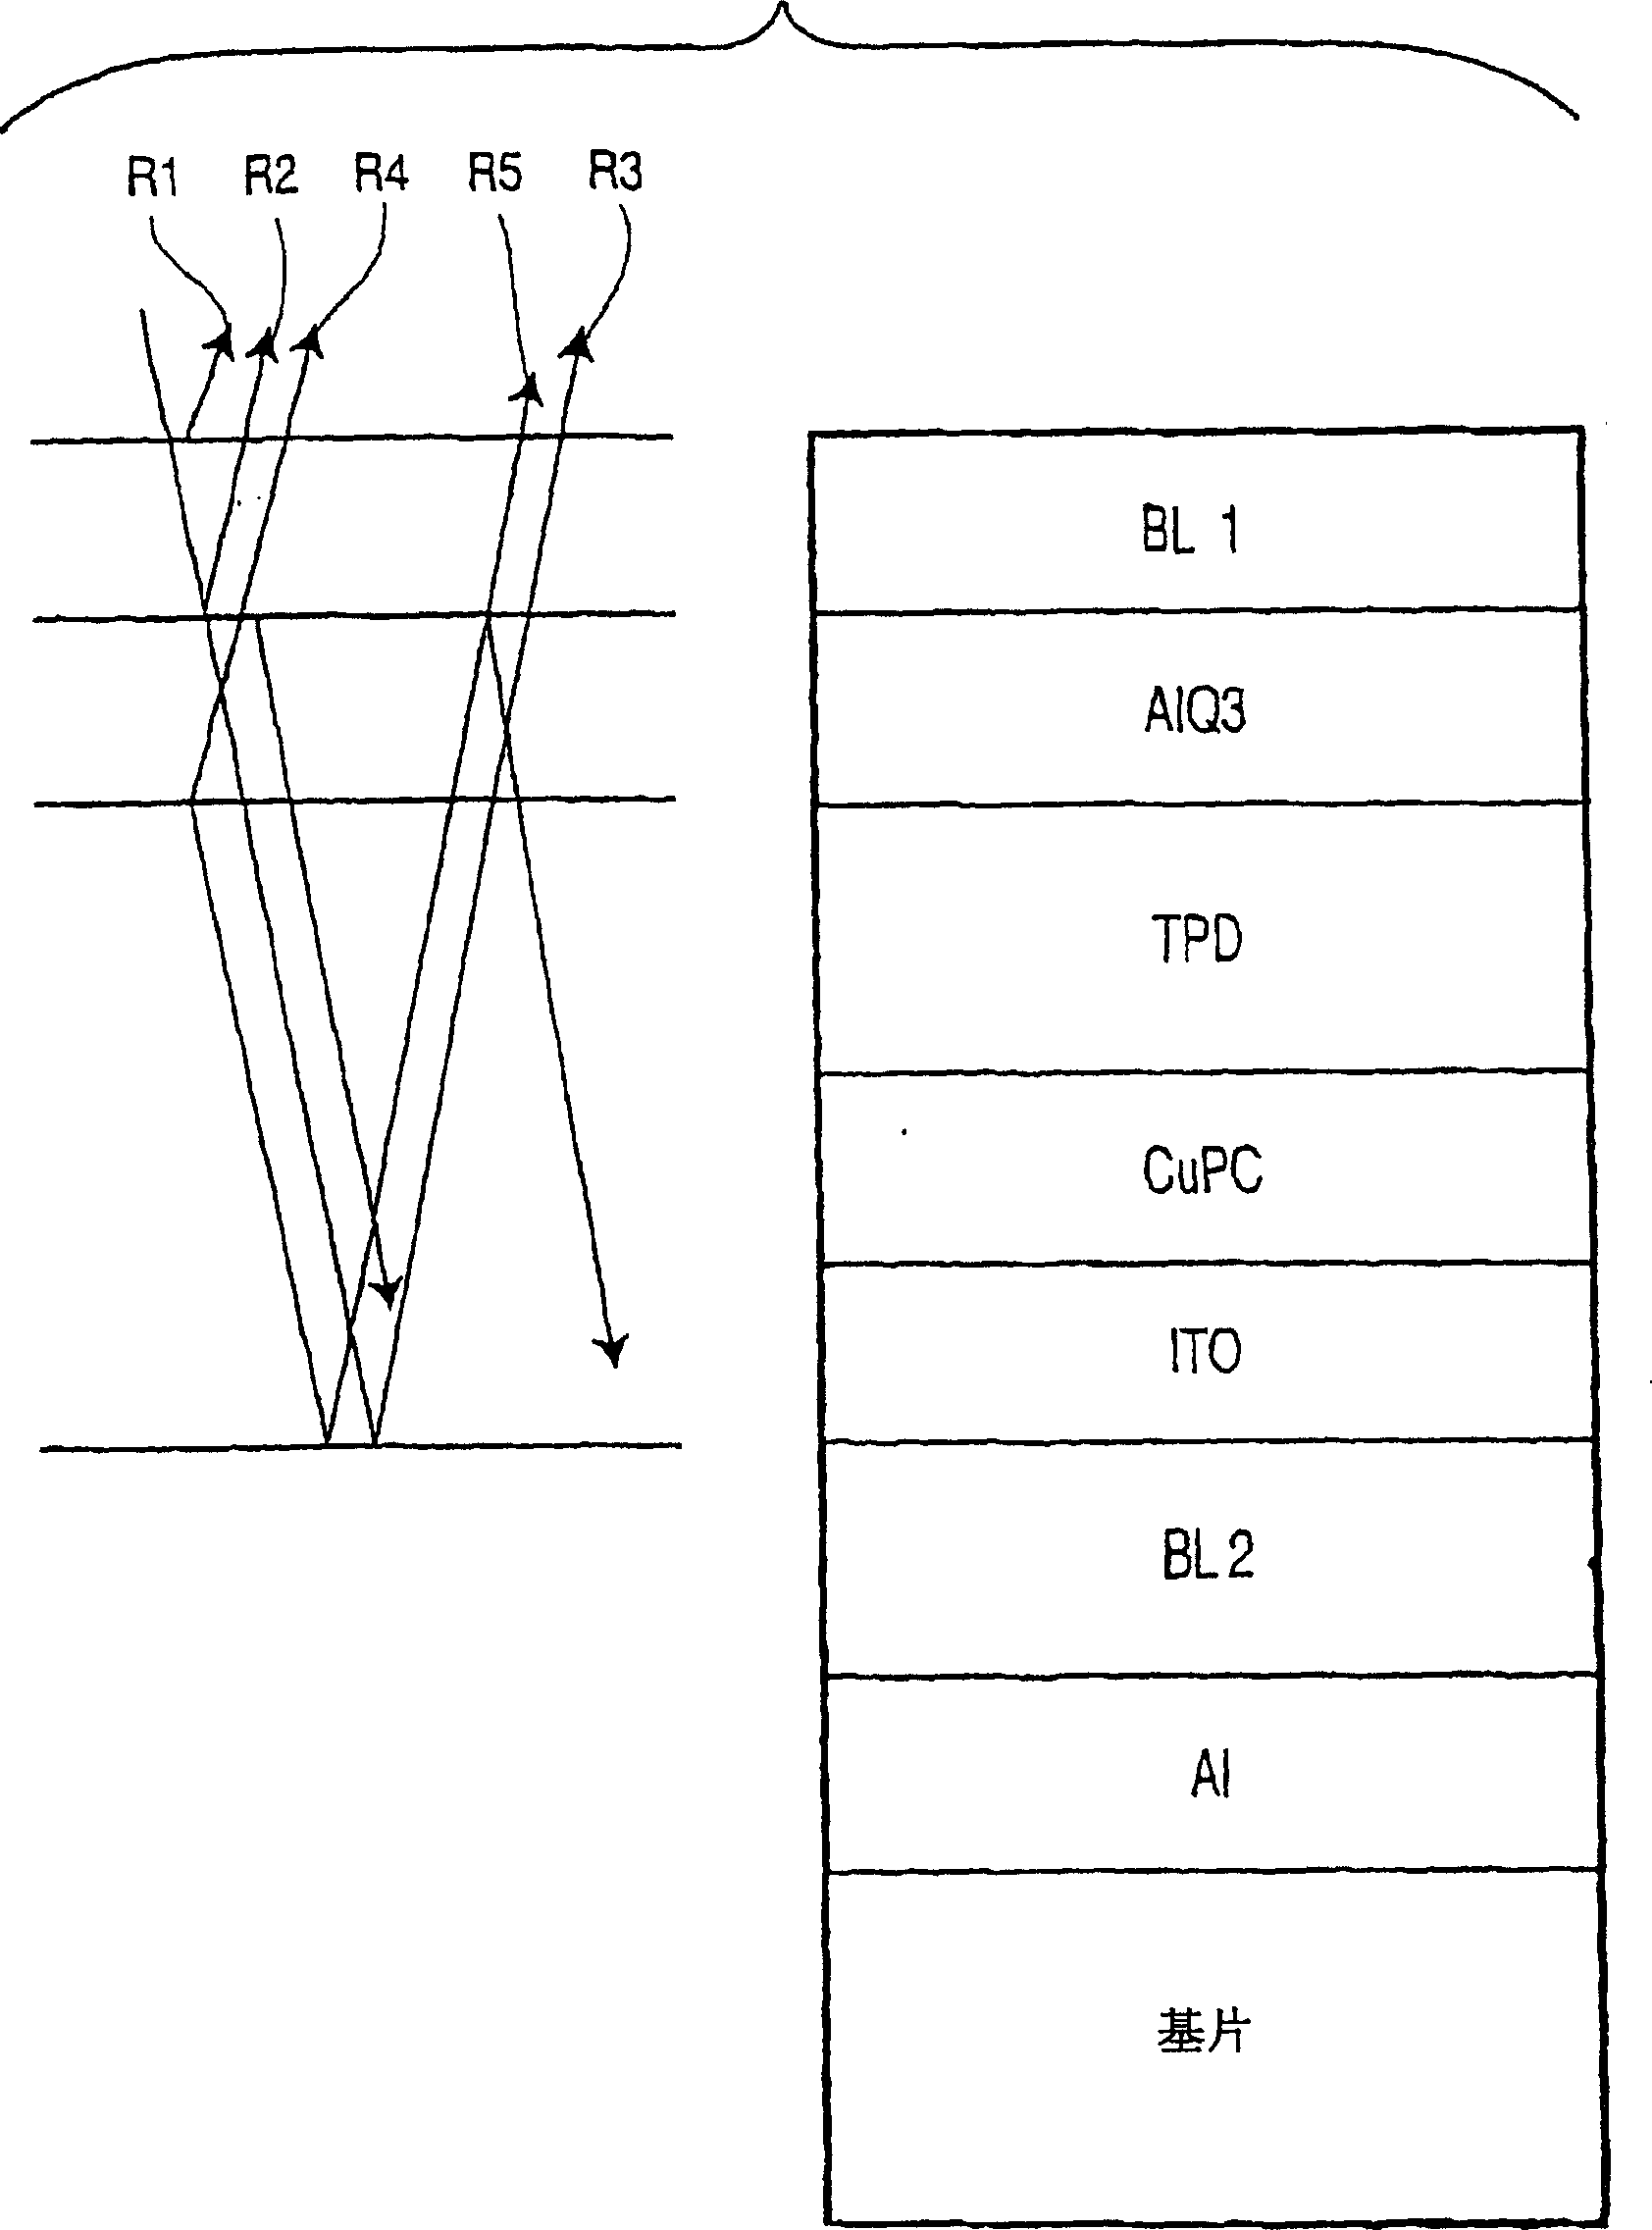 Organic light emitting diode (OLED) with contrast enhancement features